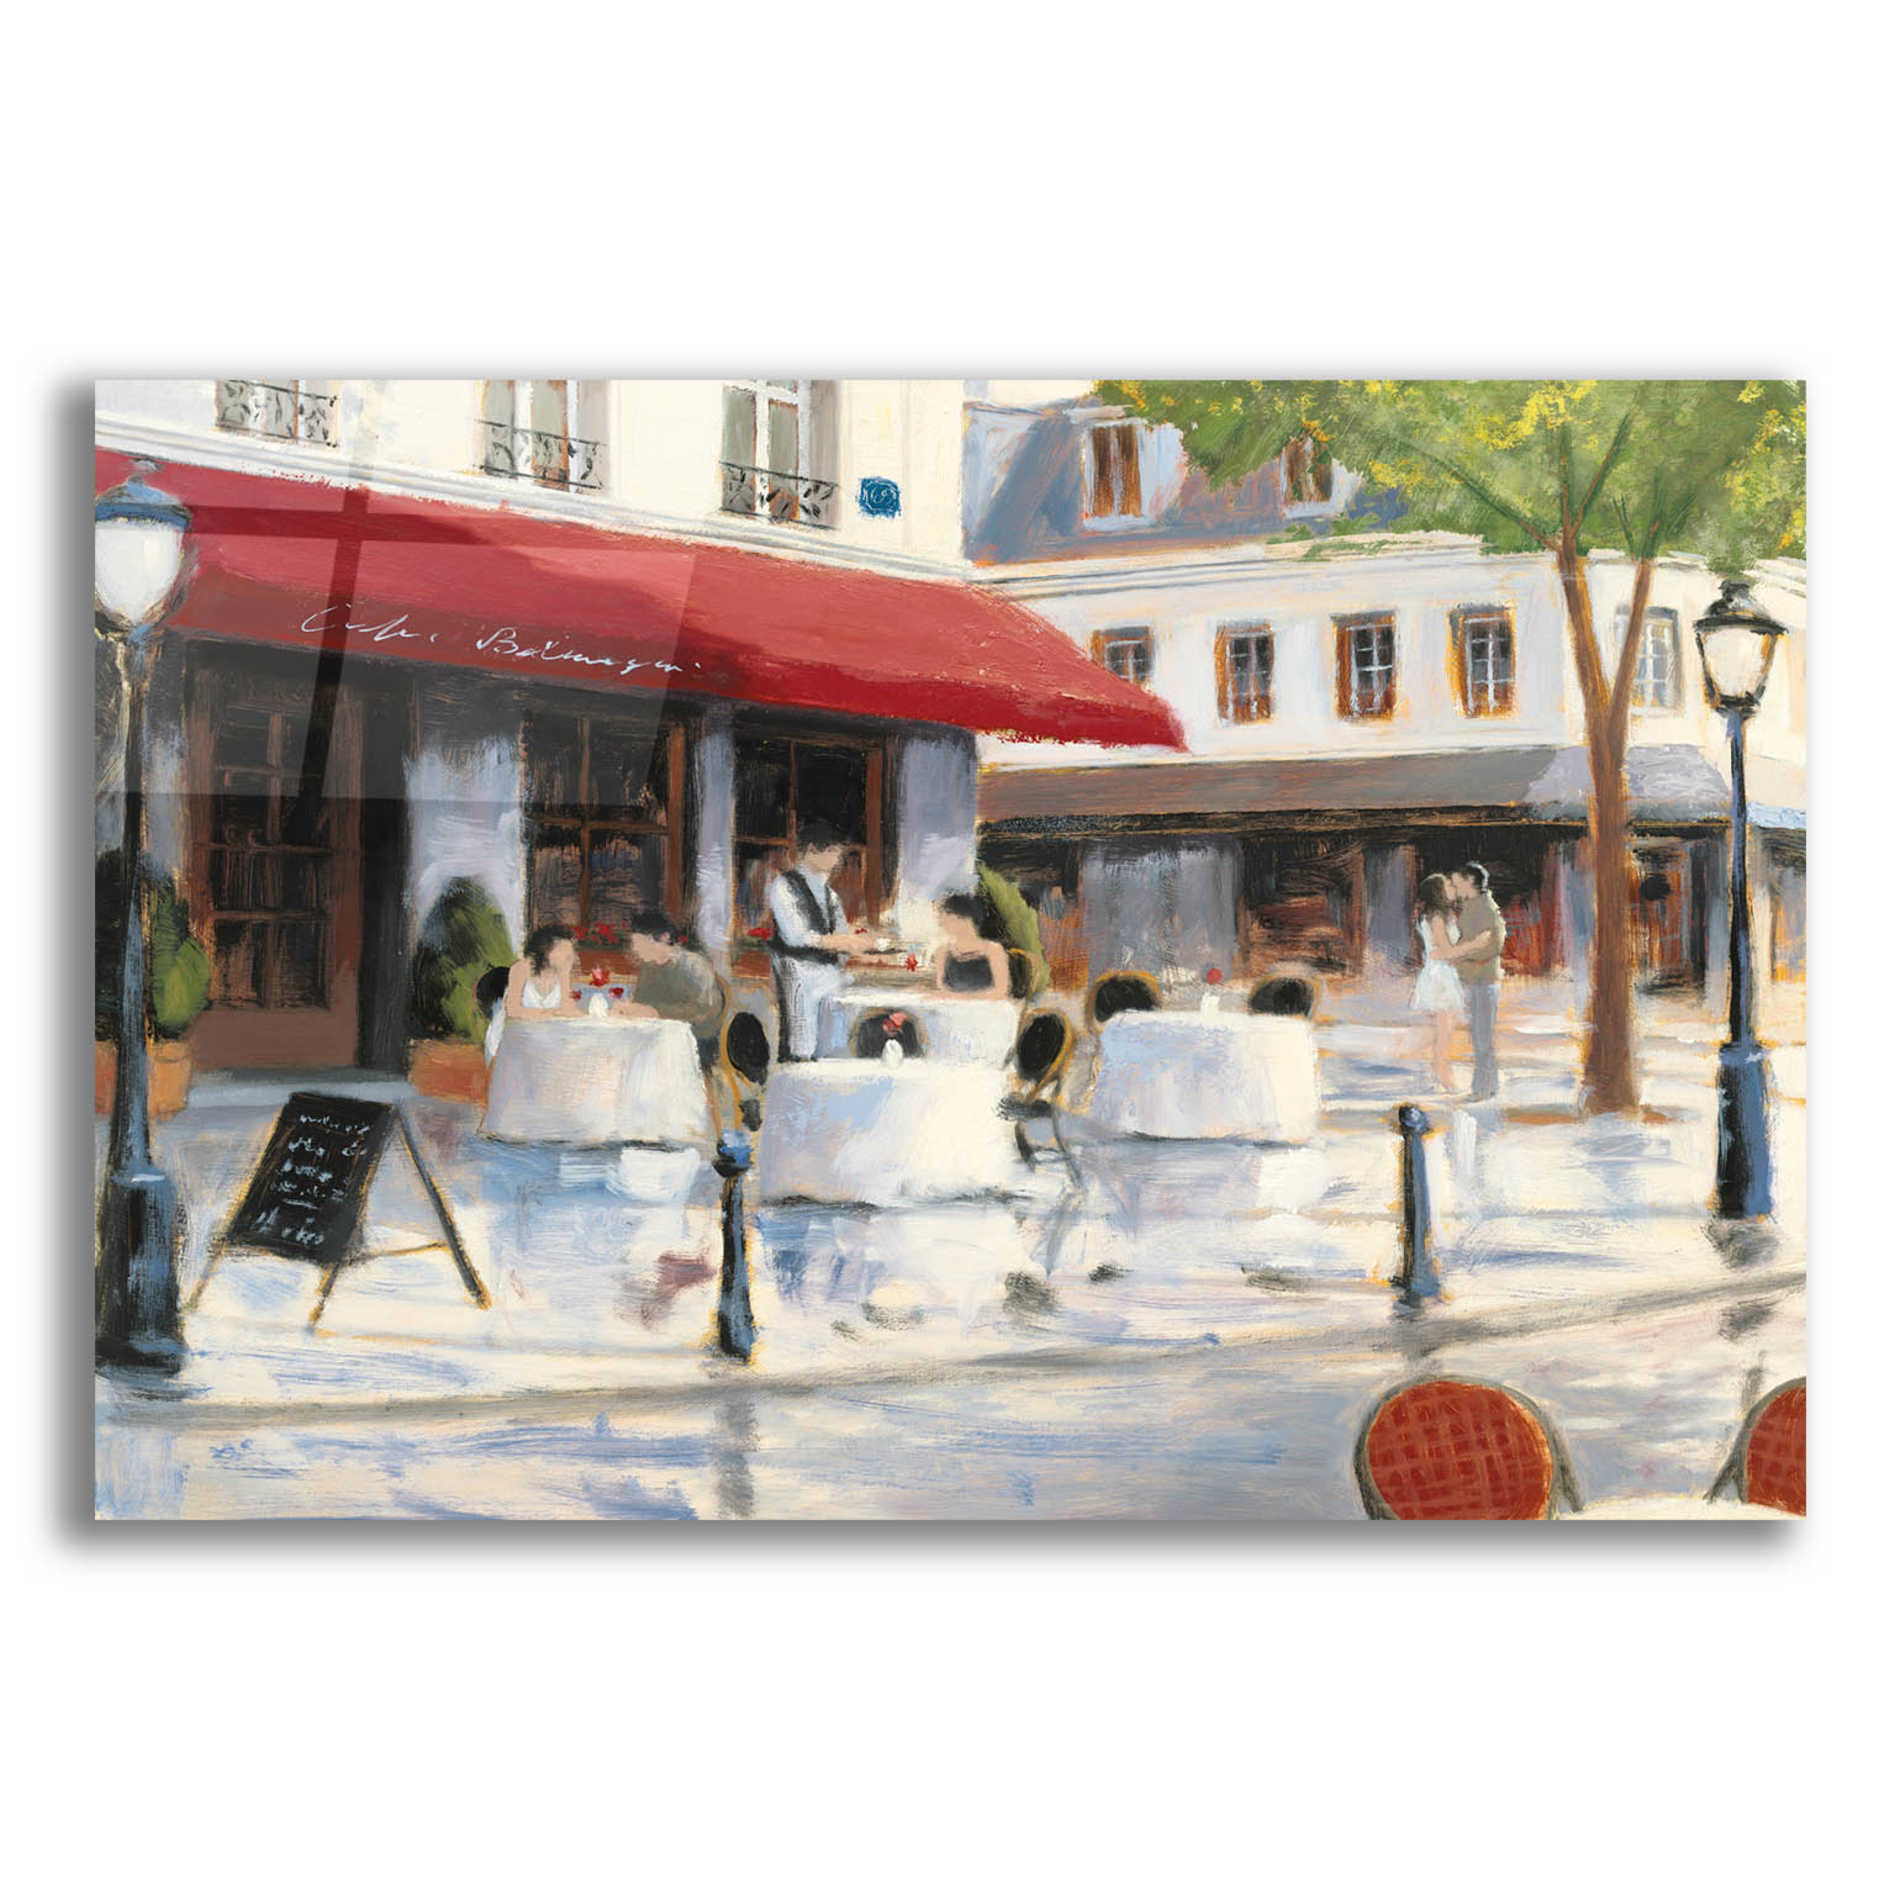 Epic Art 'Relaxing at the Cafe I' by James Wiens, Acrylic Glass Wall Art,16x12x1.1x0,26x18x1.1x0,34x26x1.74x0,54x40x1.74x0